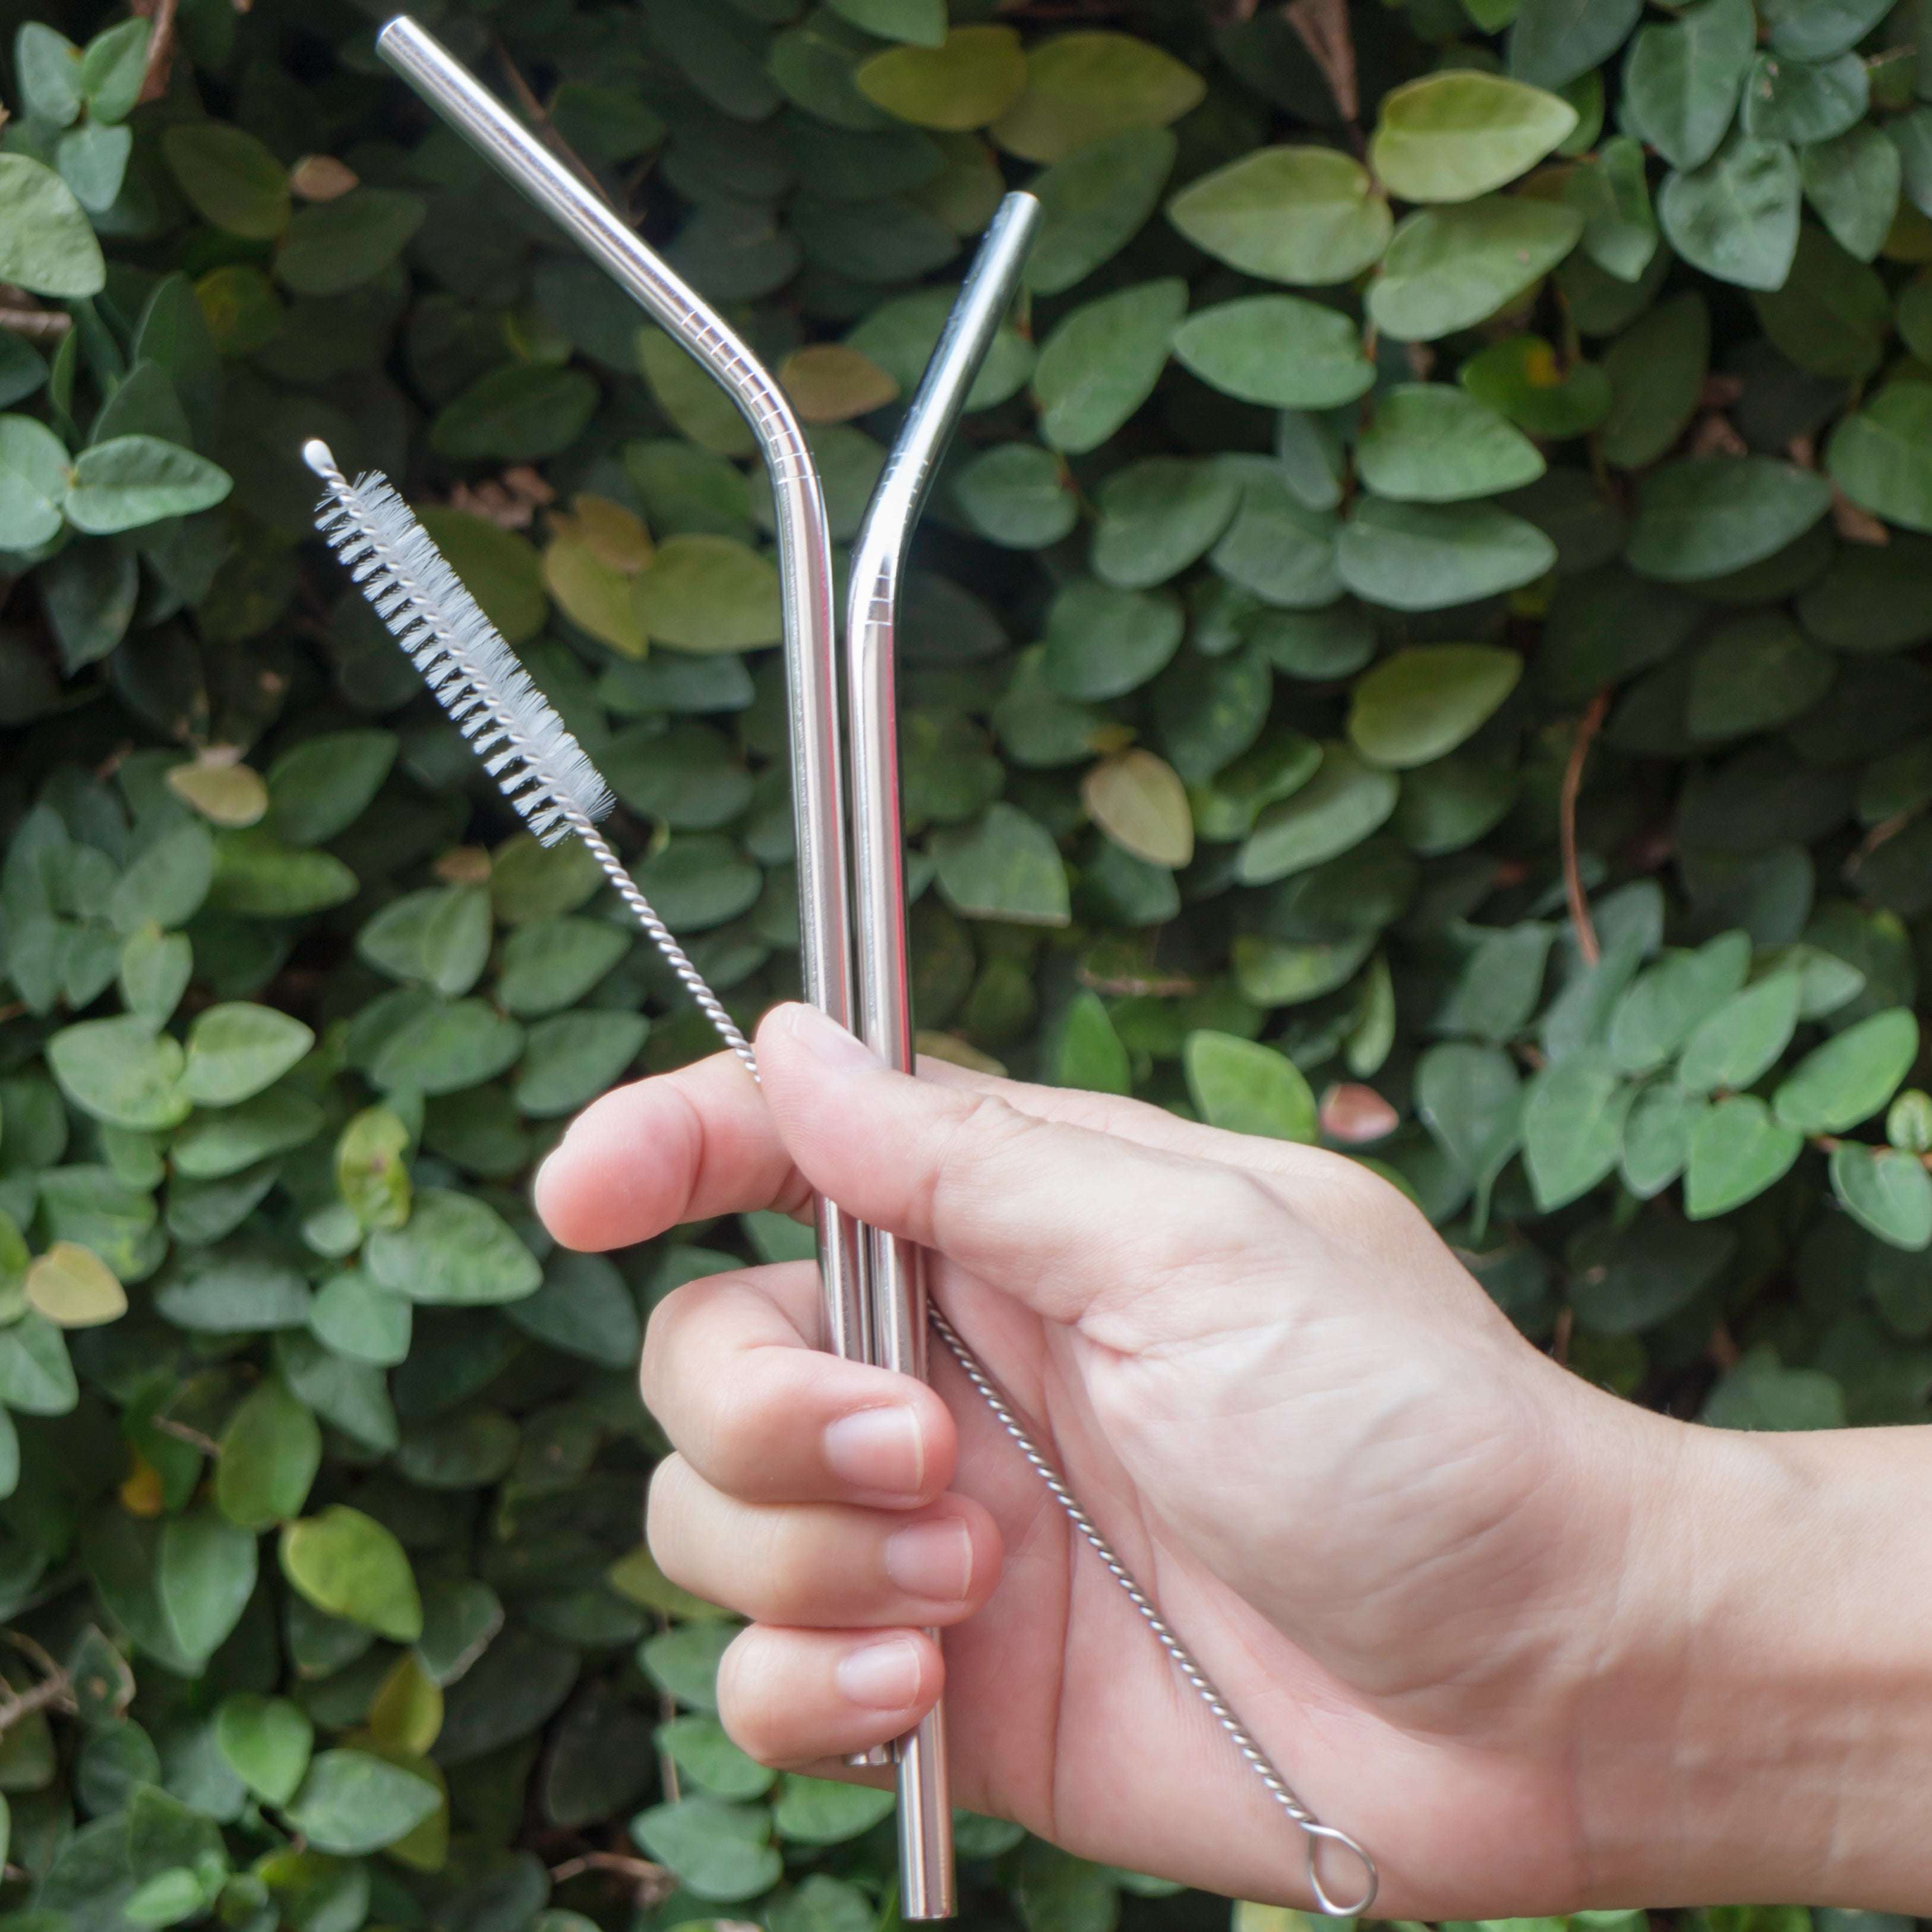 https://shop.undp.org/cdn/shop/products/sustainable-stainless-steel-straws-undp-shop-united-nations-development-programme-shop-in-hand_88e9bc0b-58d0-4f4e-834f-7fc1b612f3f8.jpg?v=1669921025